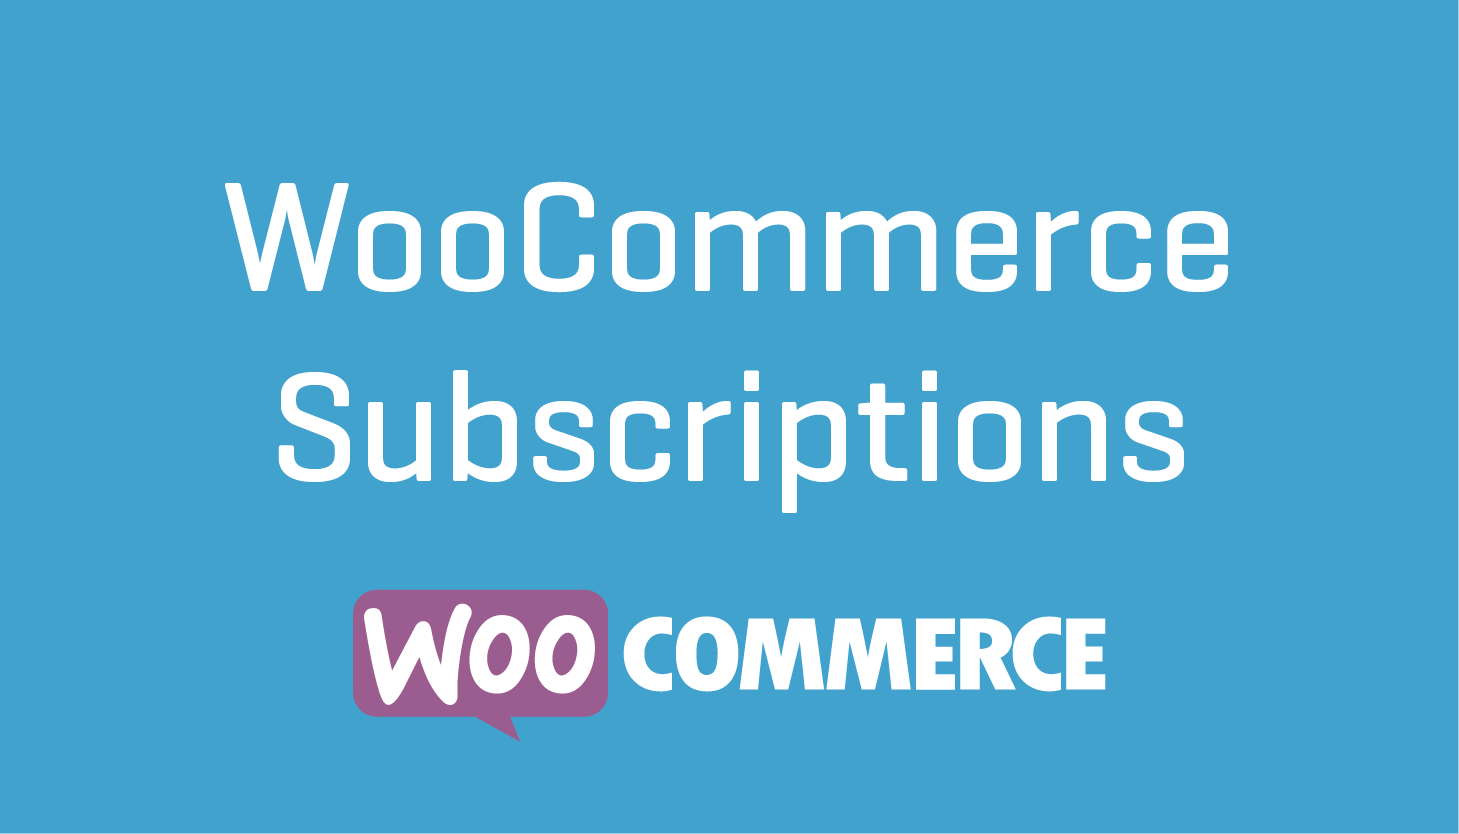 What are WooCommerce Subscriptions and how to use them